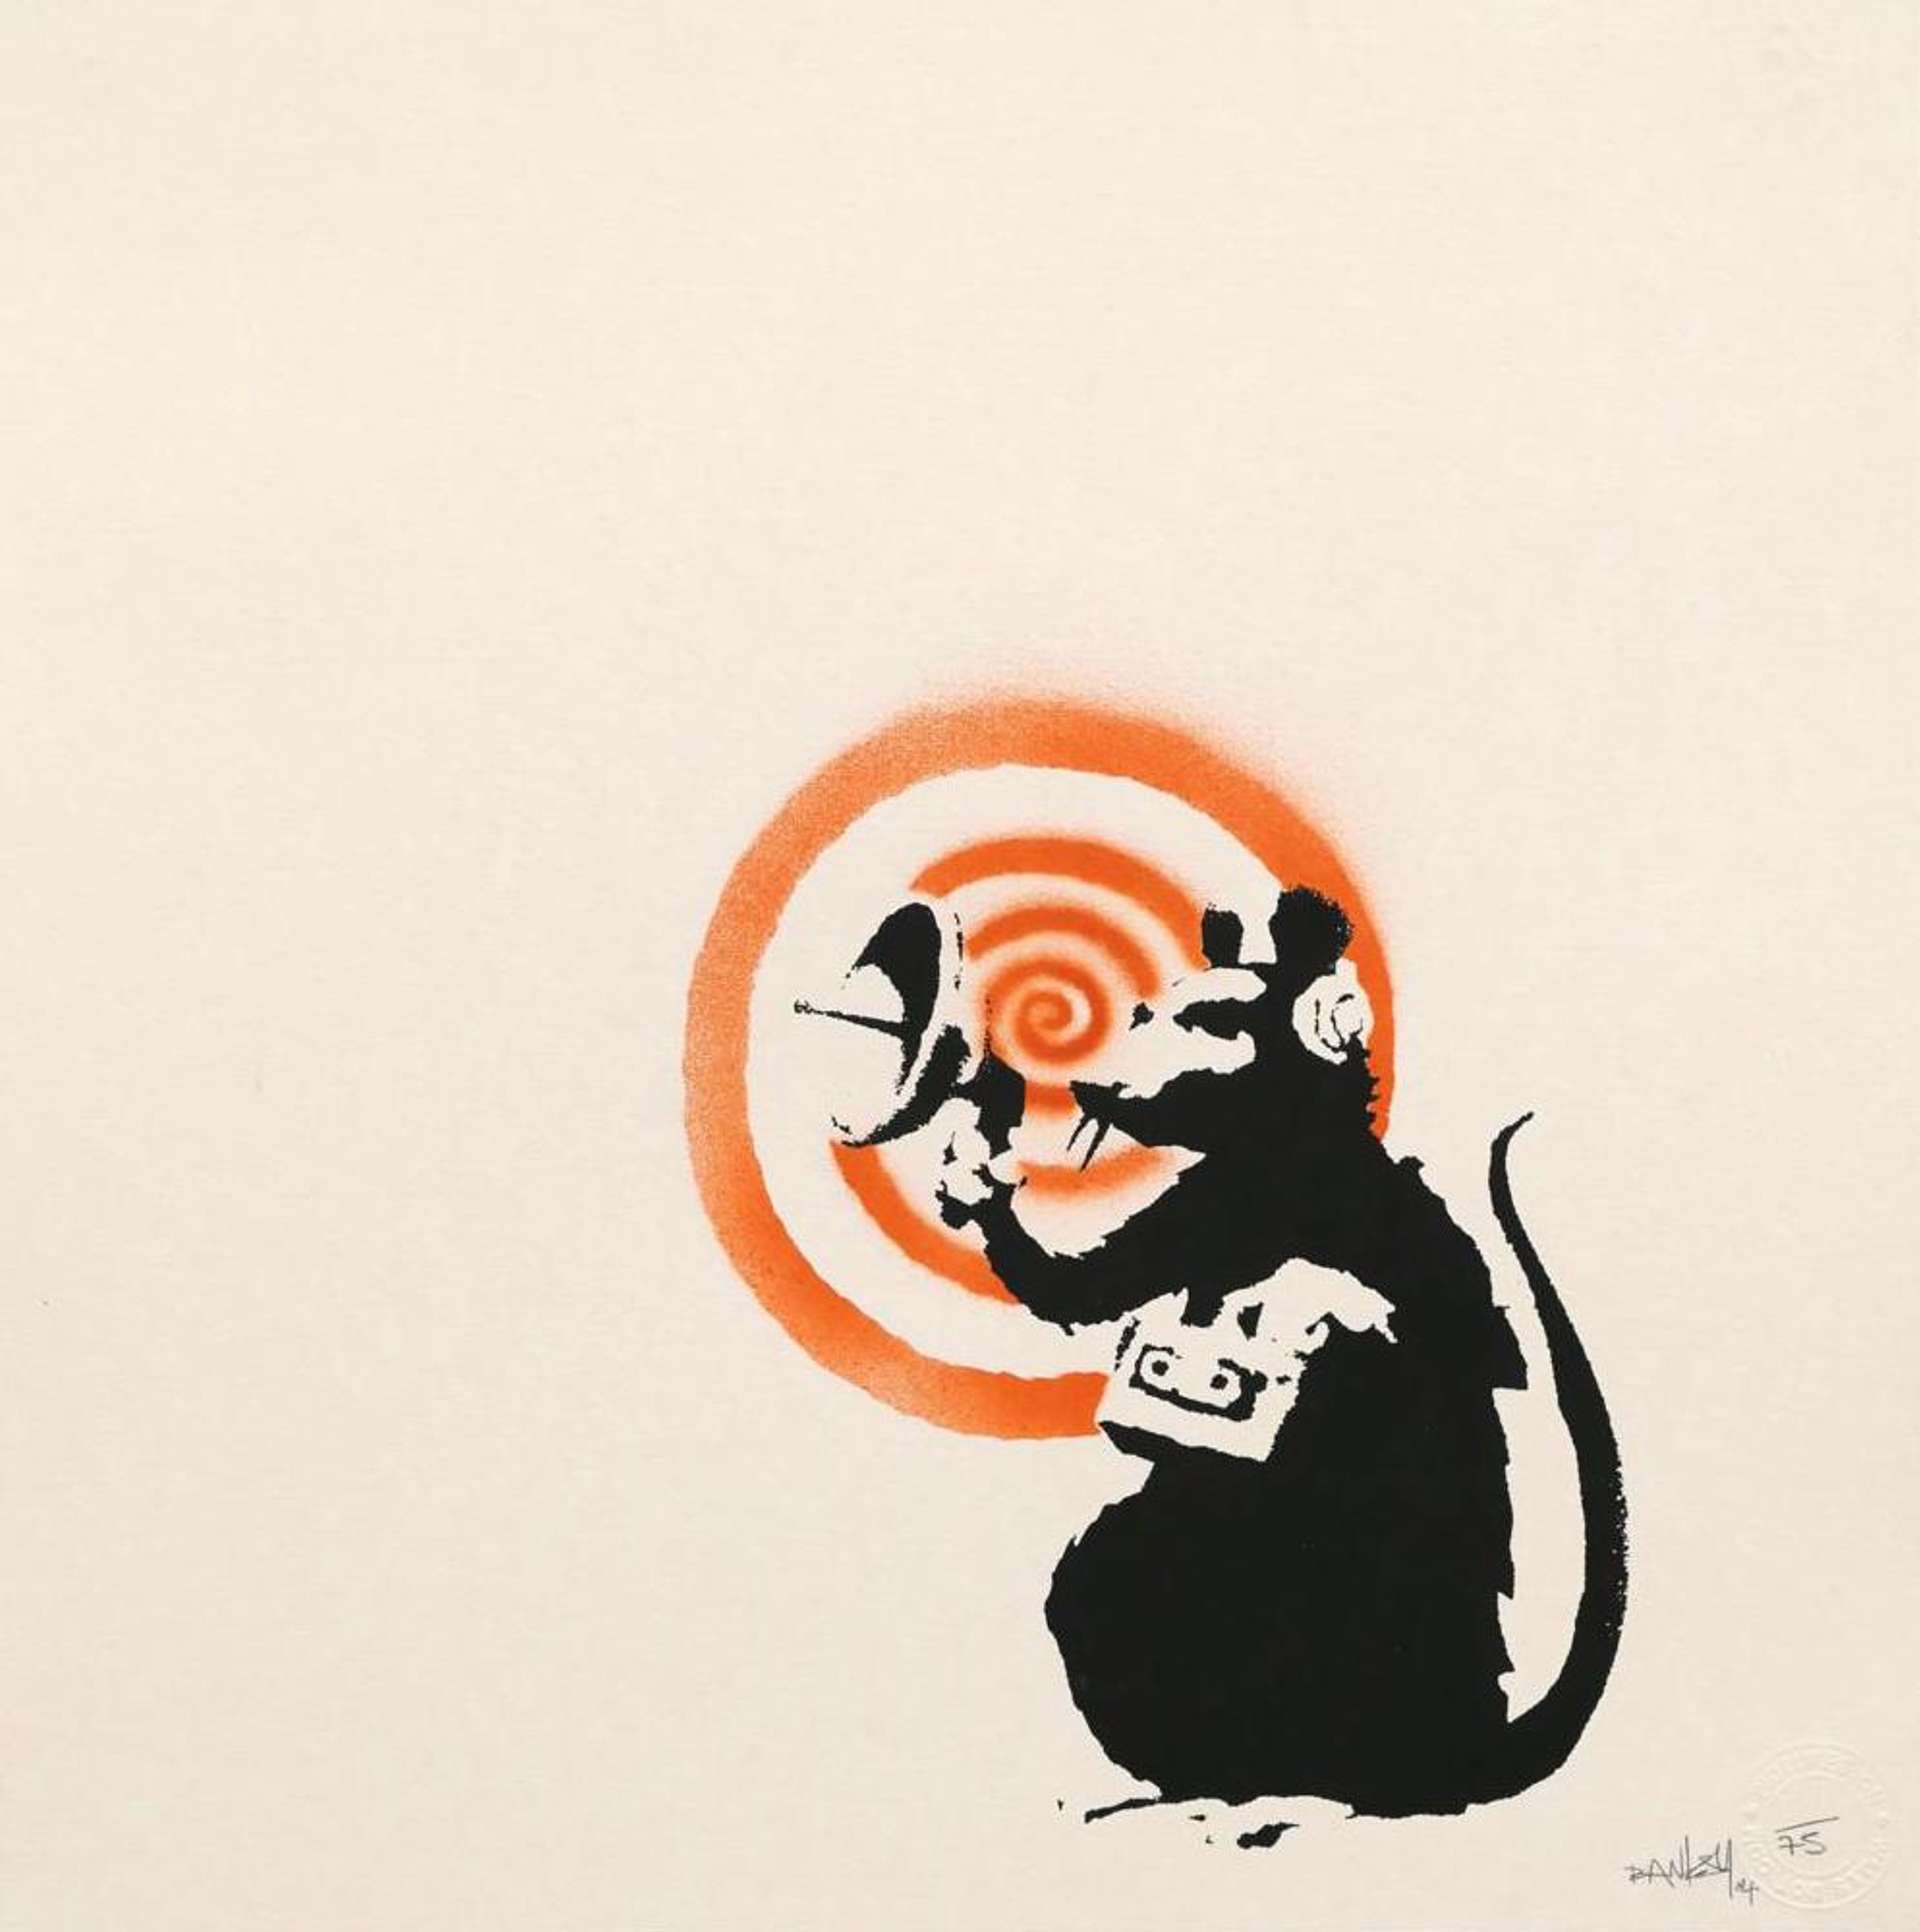 Spray painted rat on its hind legs wearing headphones and holding a tape recorder and receiver with an orange radar spiral in the background